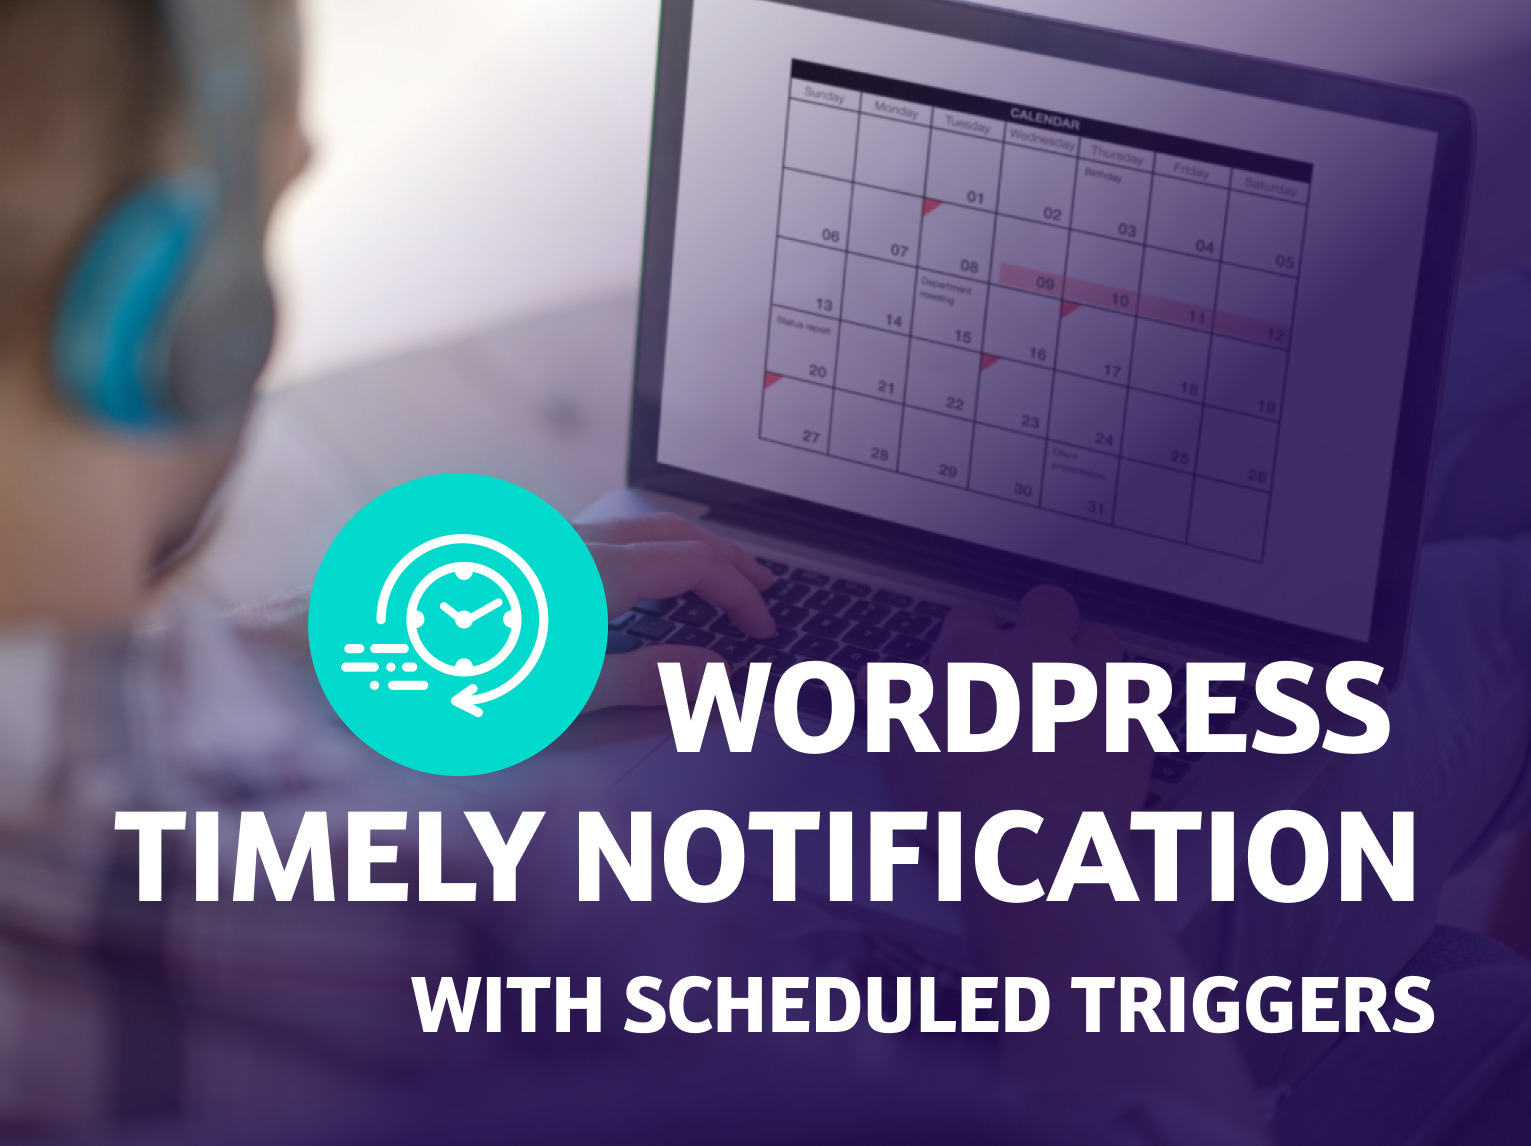 Setting timely notification for WordPress by scheduling triggers plugin by BracketSpace